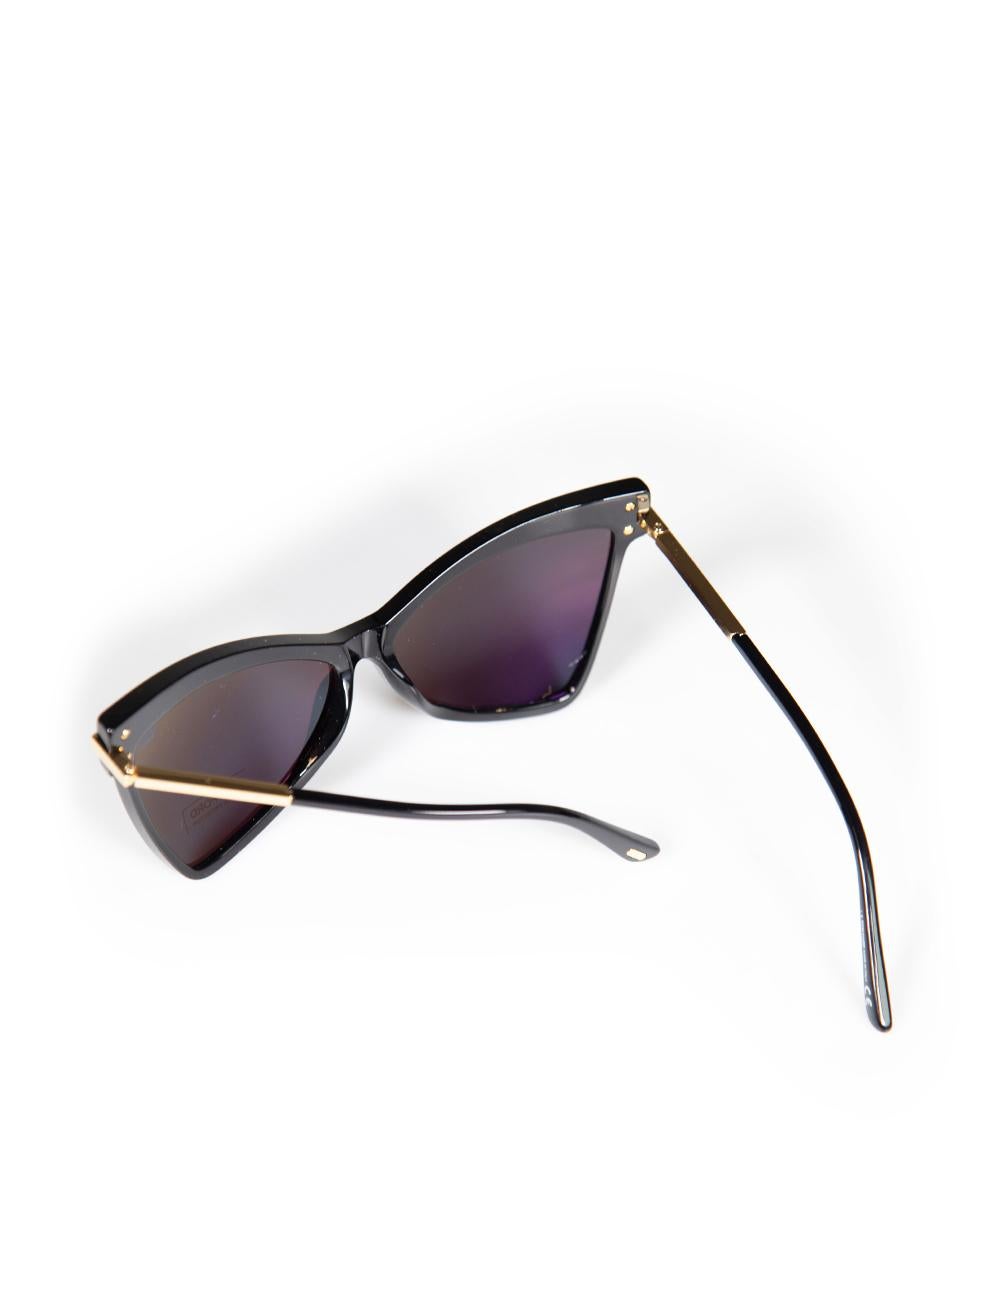 Tom Ford Tallulah Shiny Black Butterfly Sunglasses For Sale 3